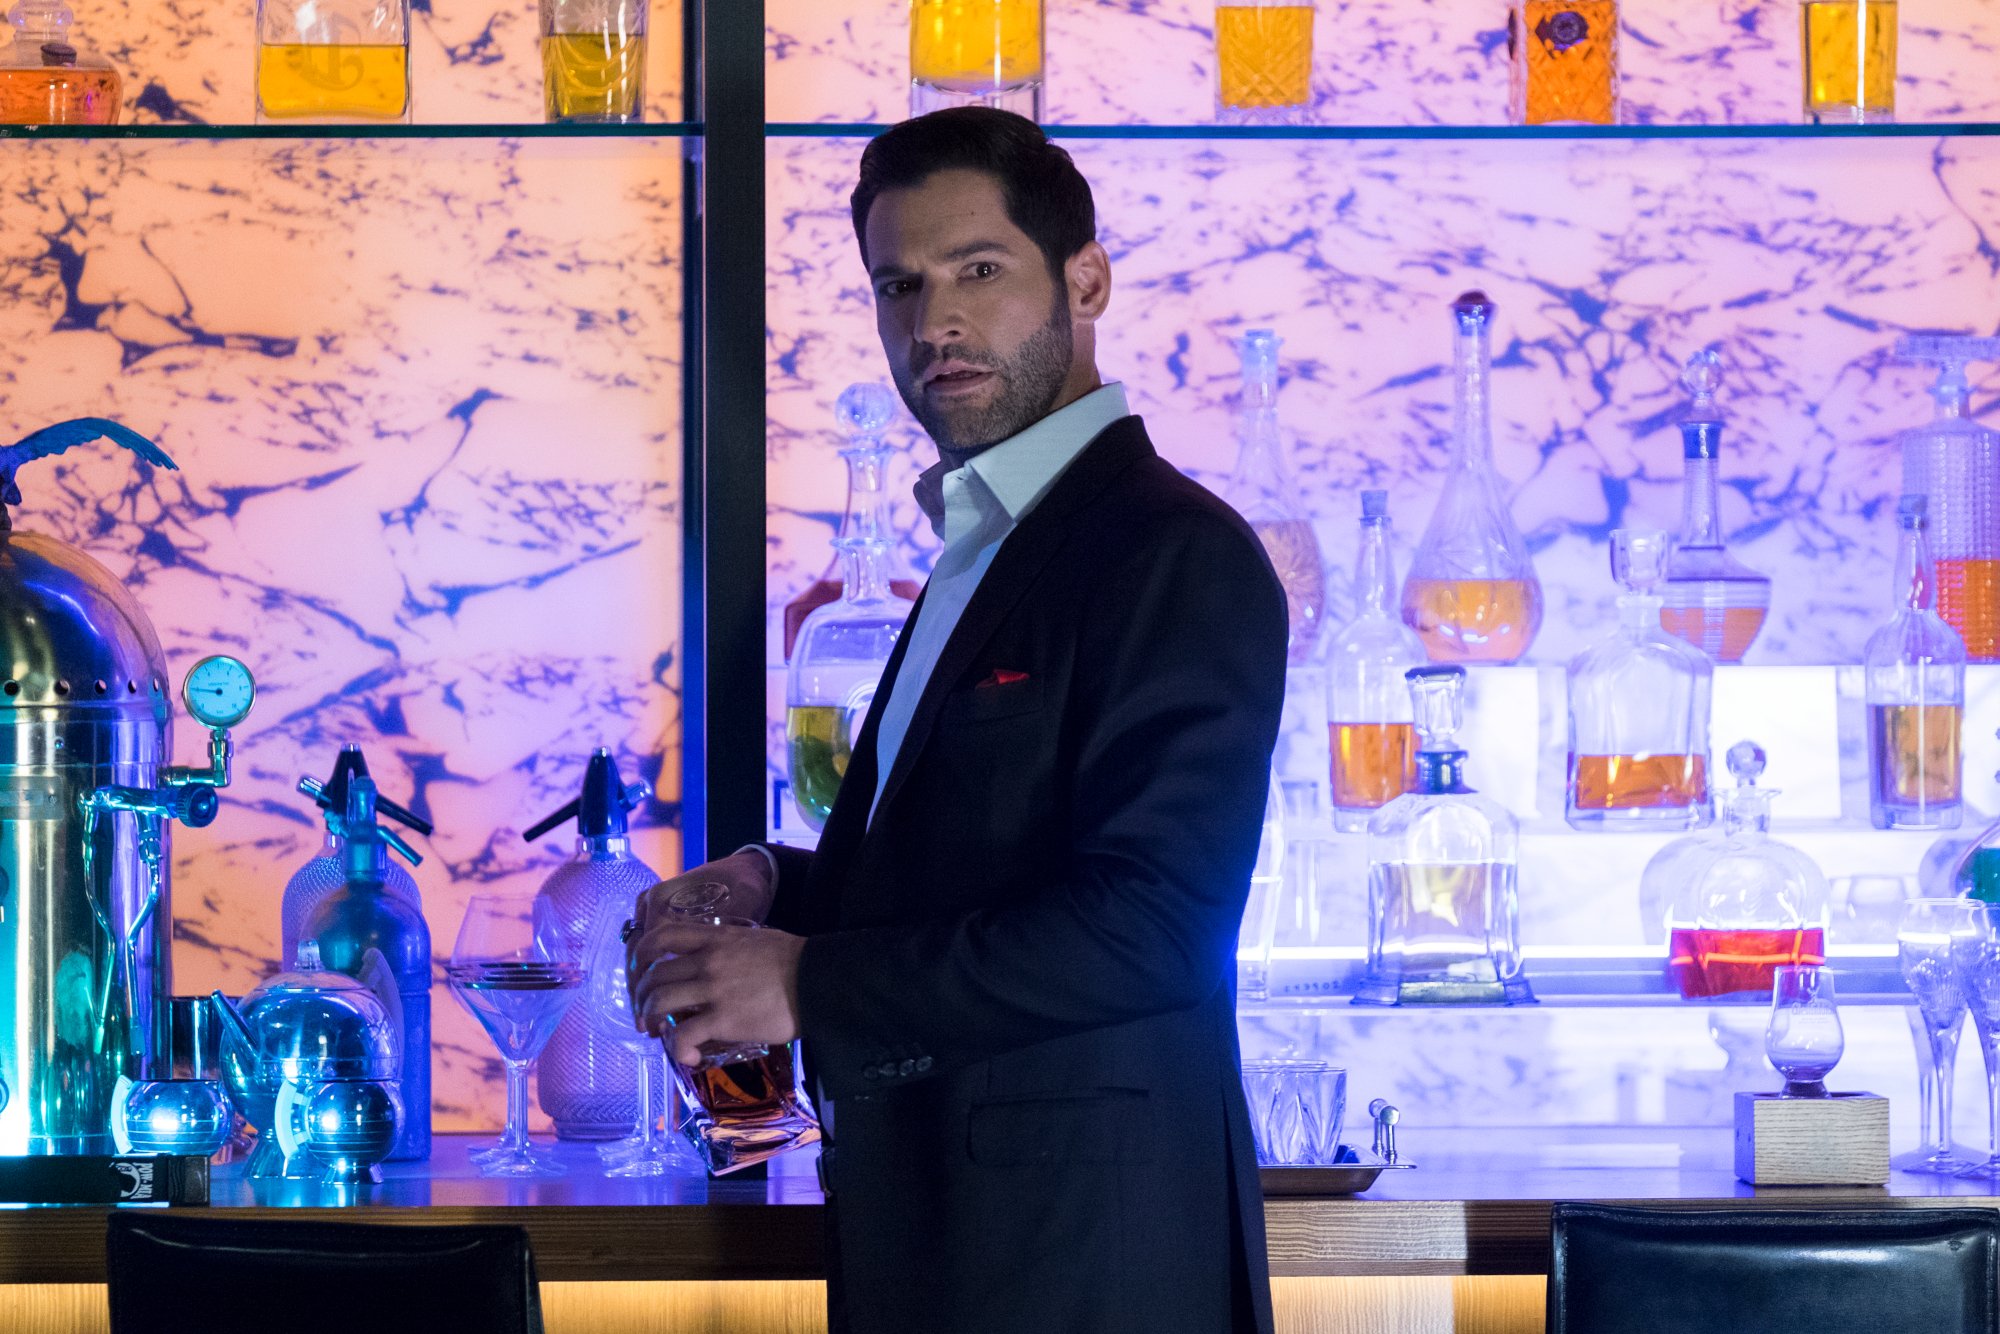 A shot of Tom Ellis as Lucifer Morningstar in 'Lucifer' Season 4. He's standing in front of a bar and holding a drink. 'Lucifer' Season 2 set up many of the storylines the show's later episodes would cover.